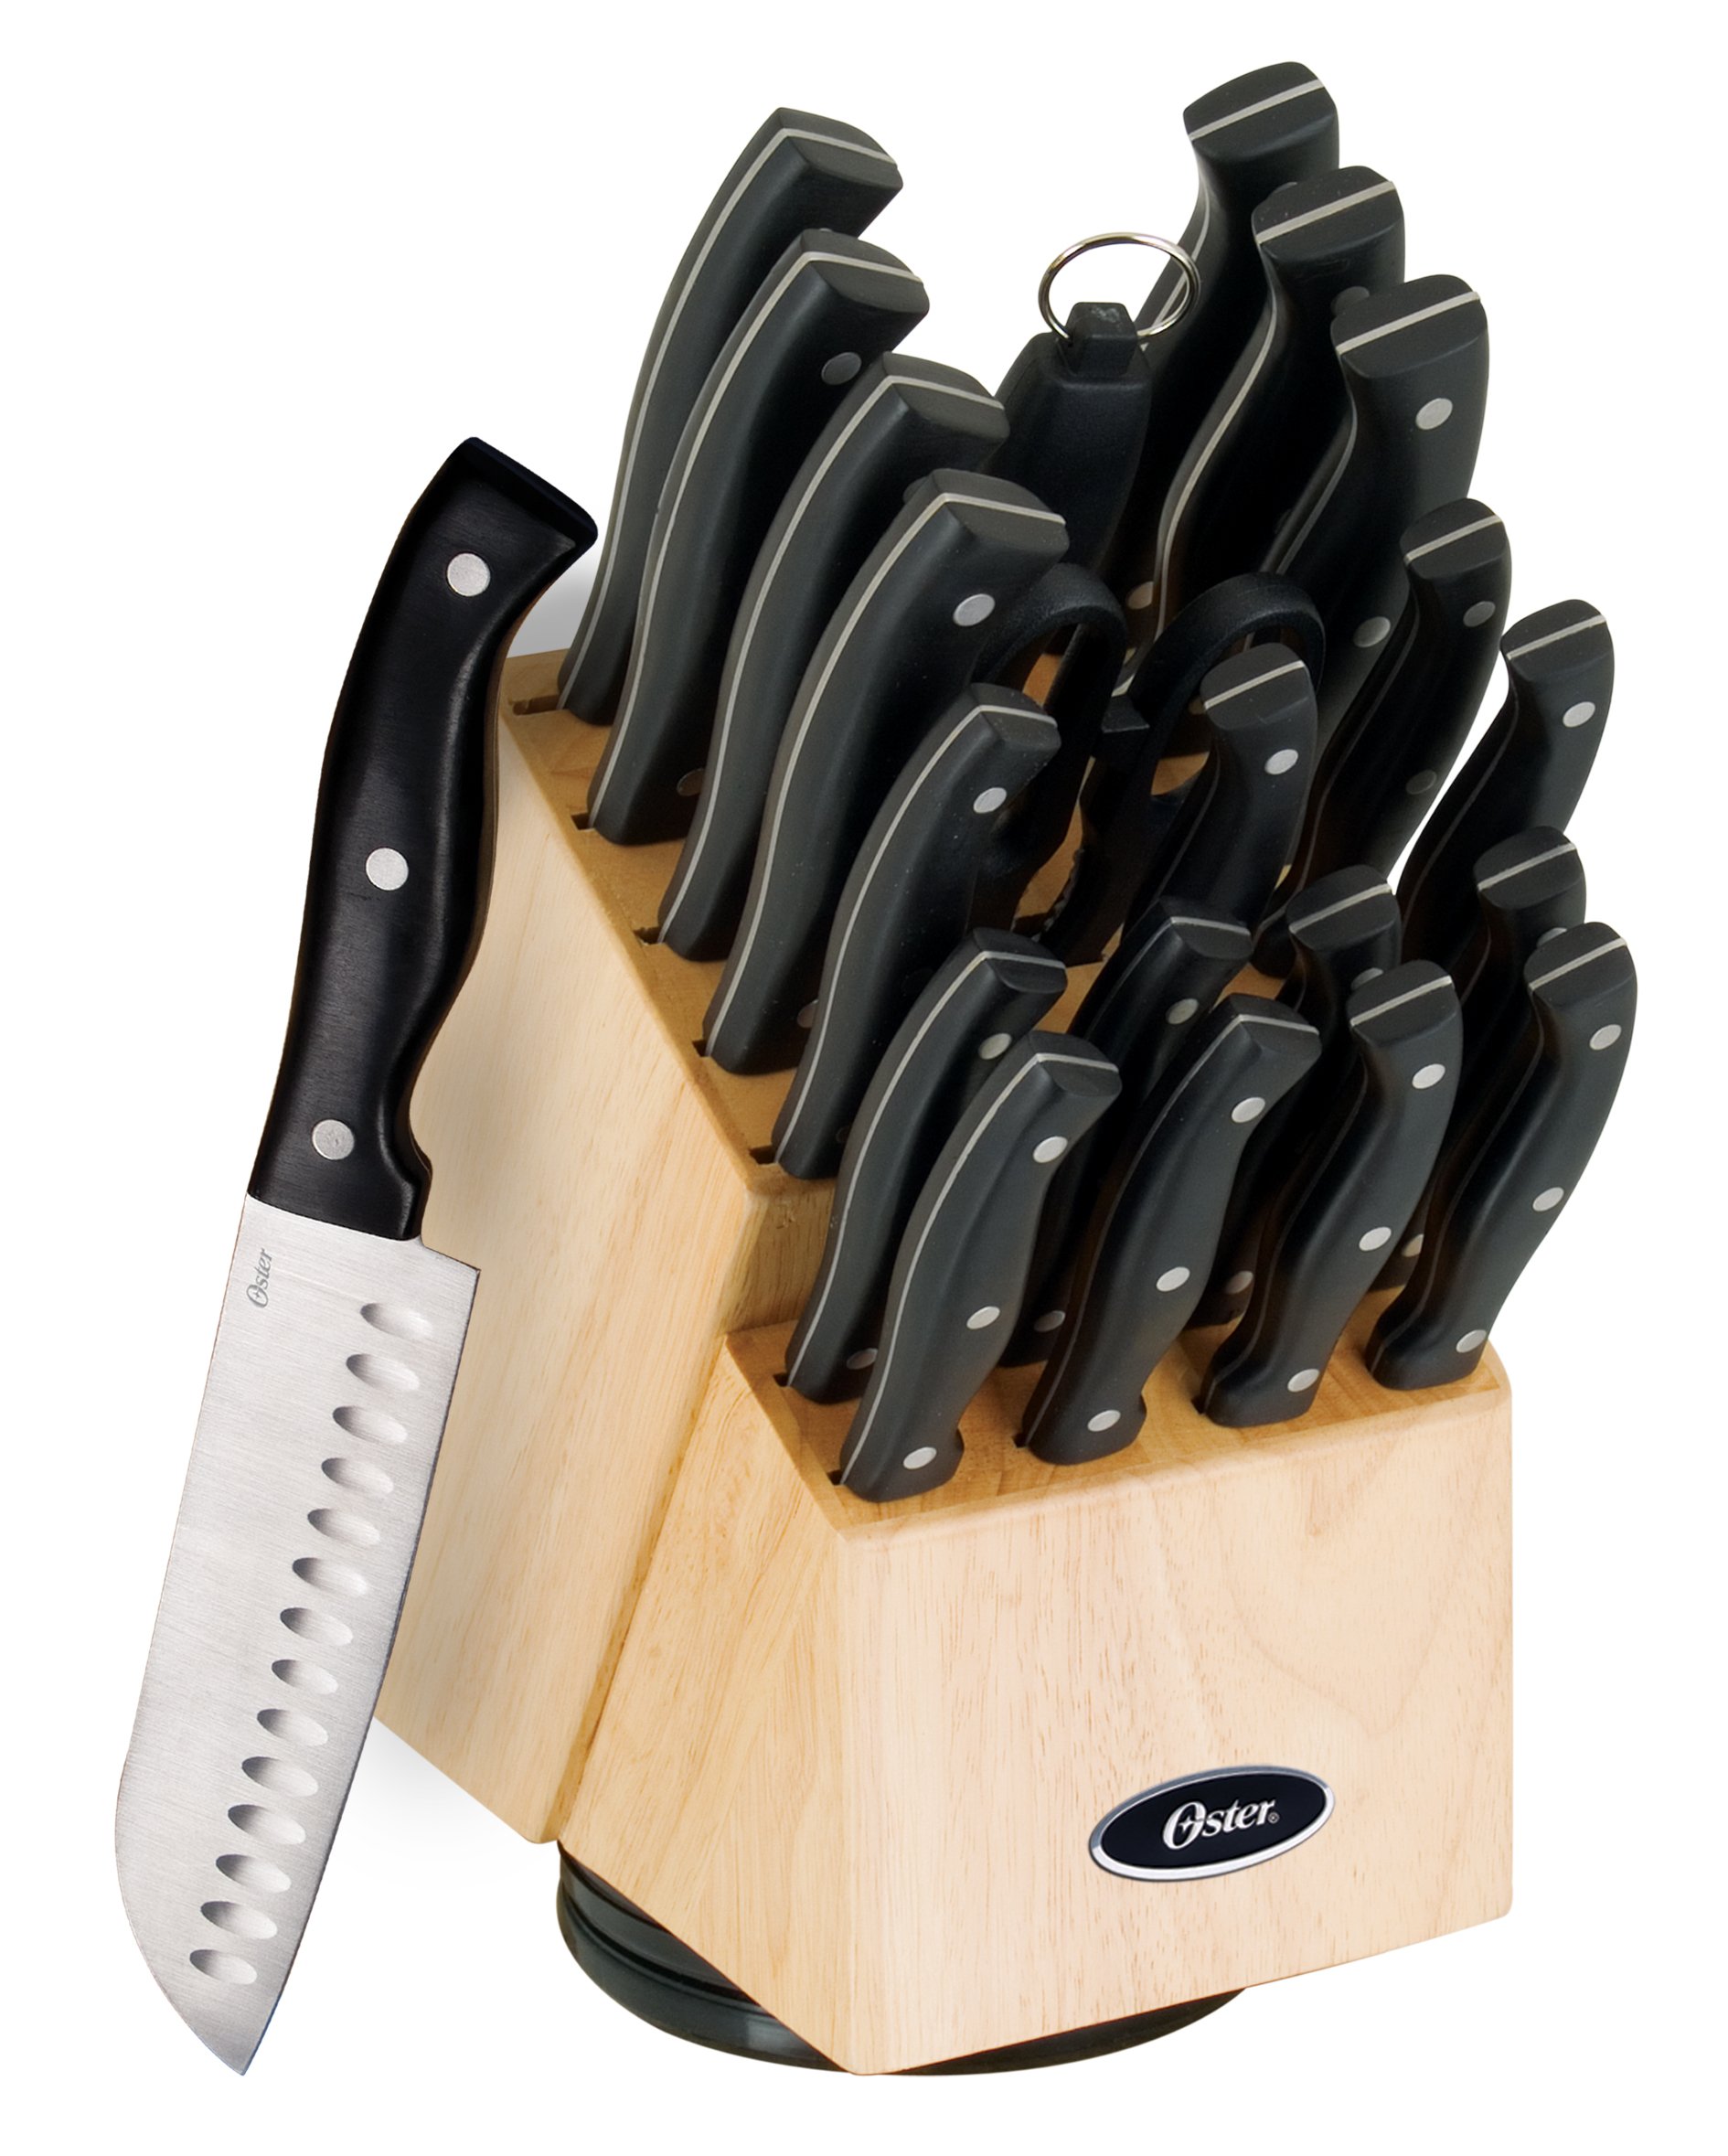 Oster Winsted Stainless Steel Cutlery Wood Block Set, 22 Piece, Black